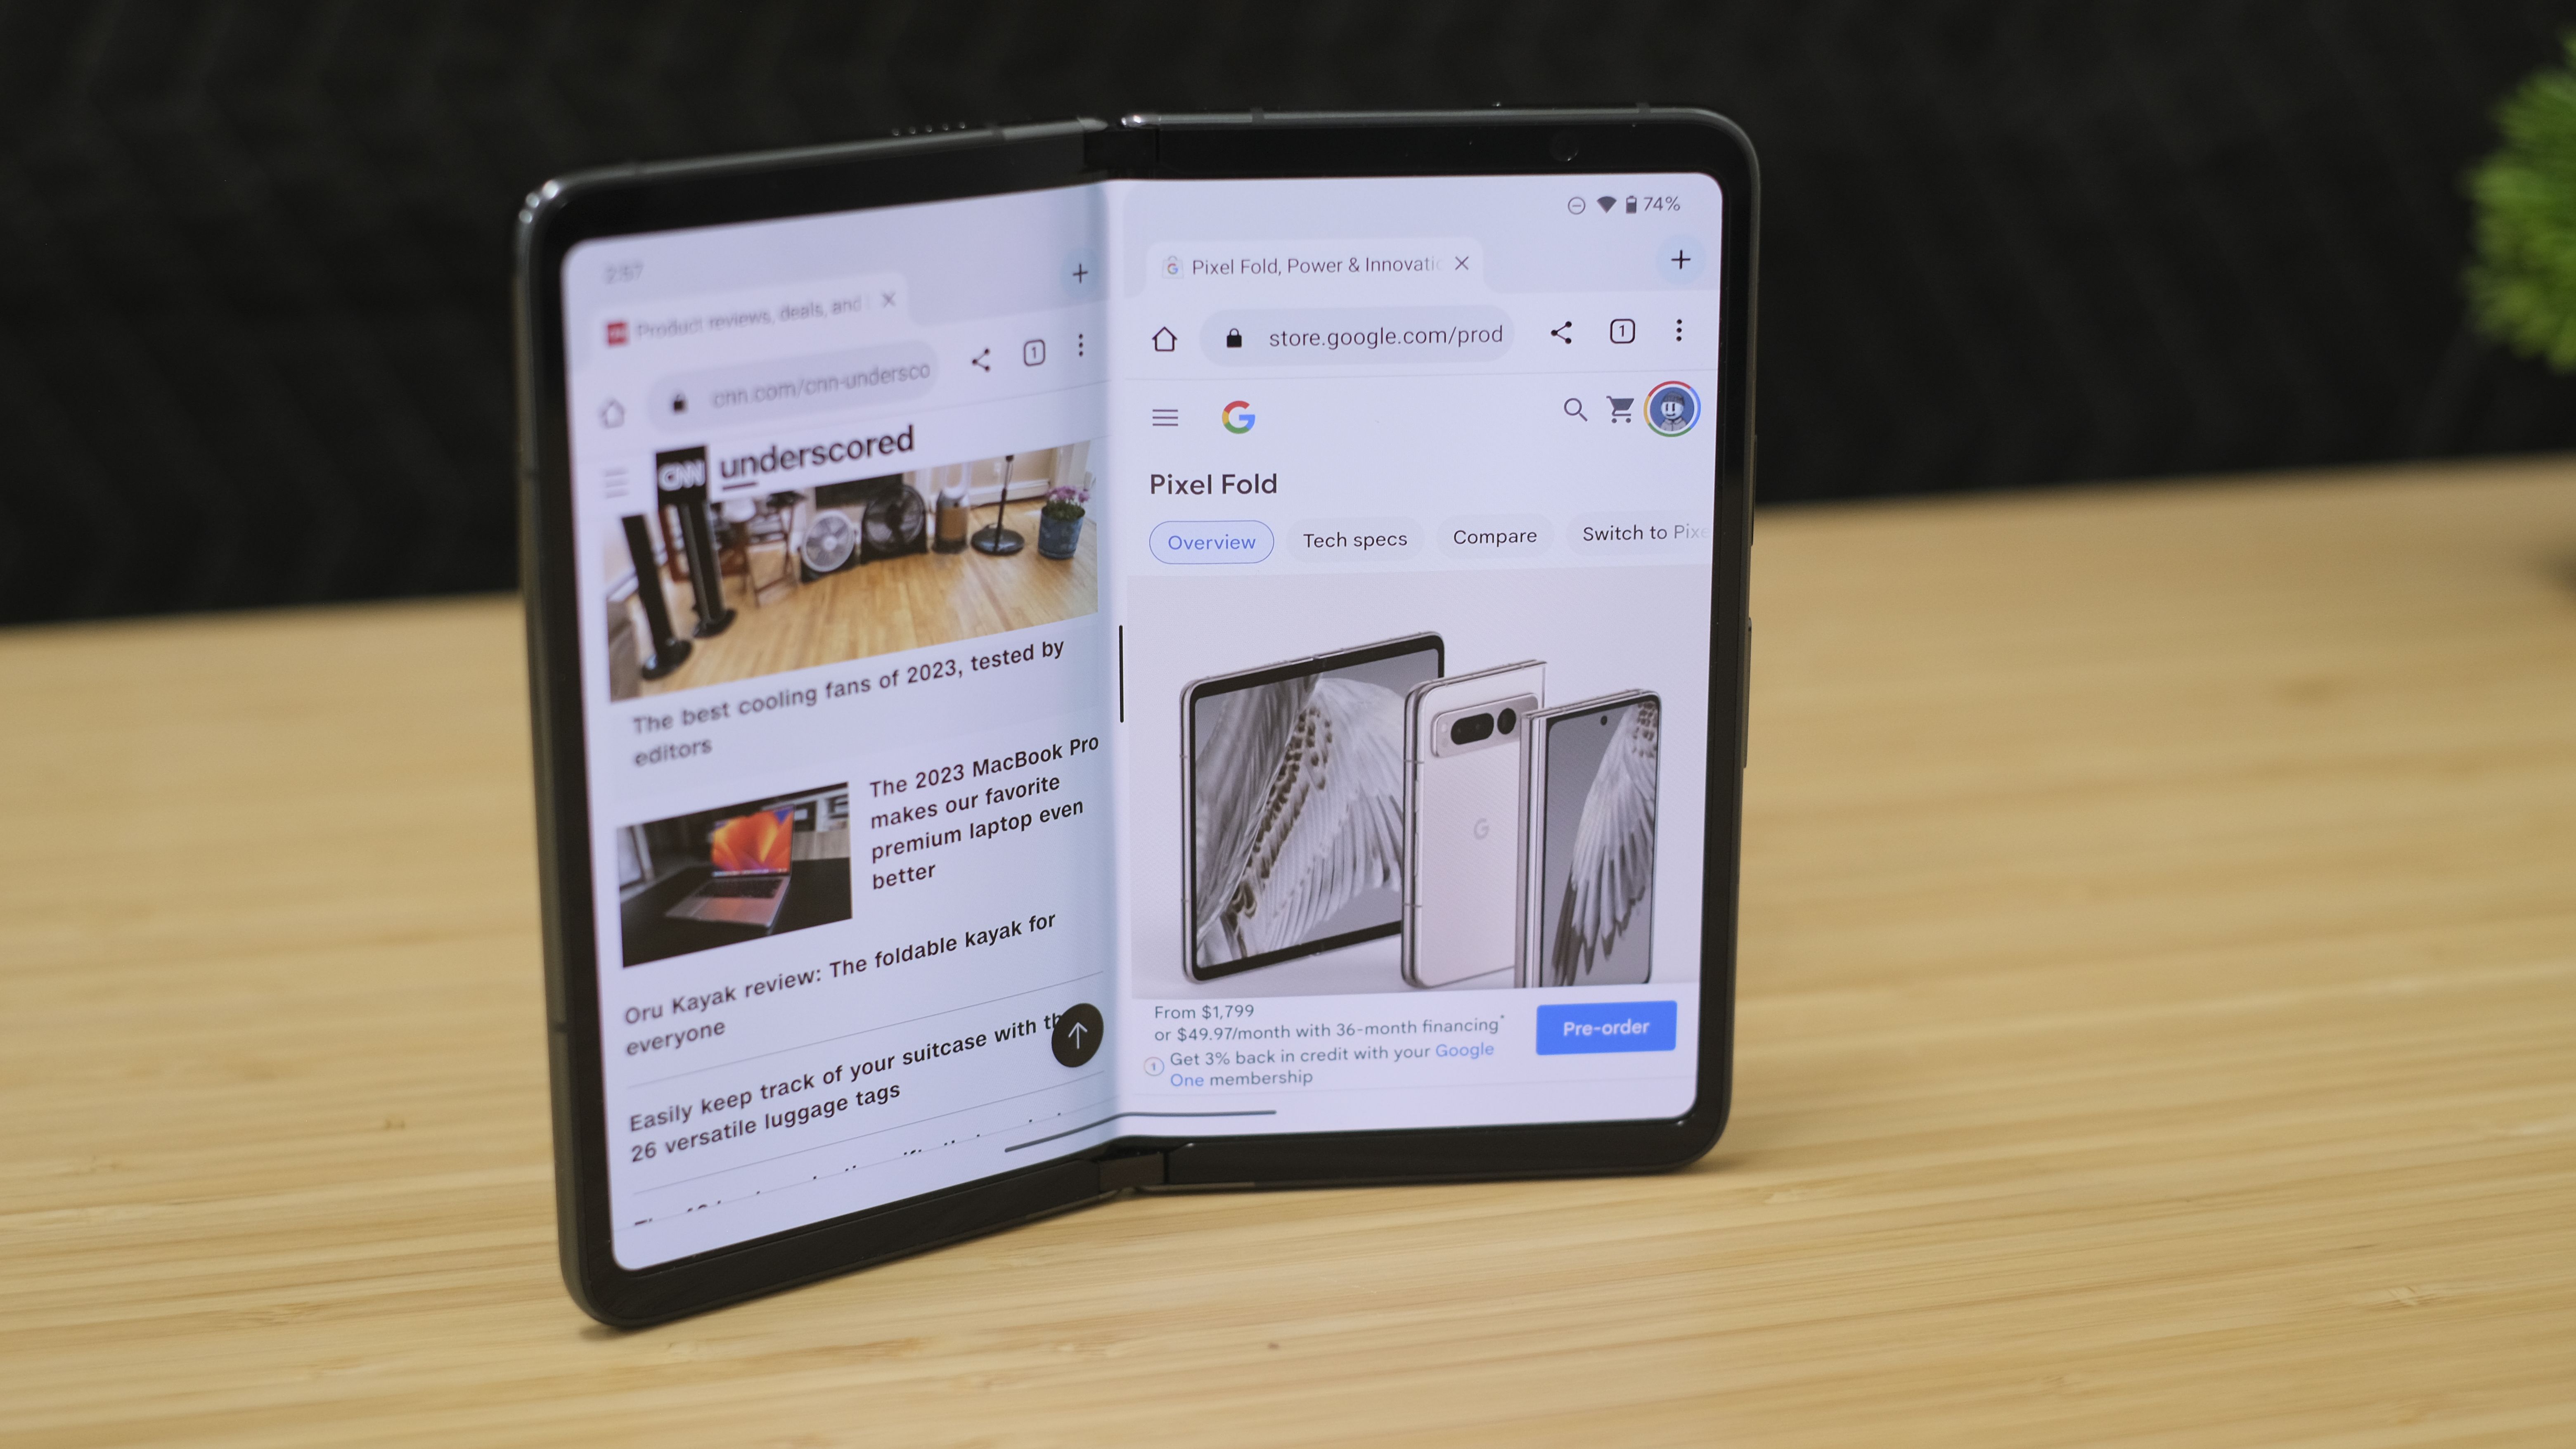 Google Pixel Fold review: My favorite foldable, but not quite the best